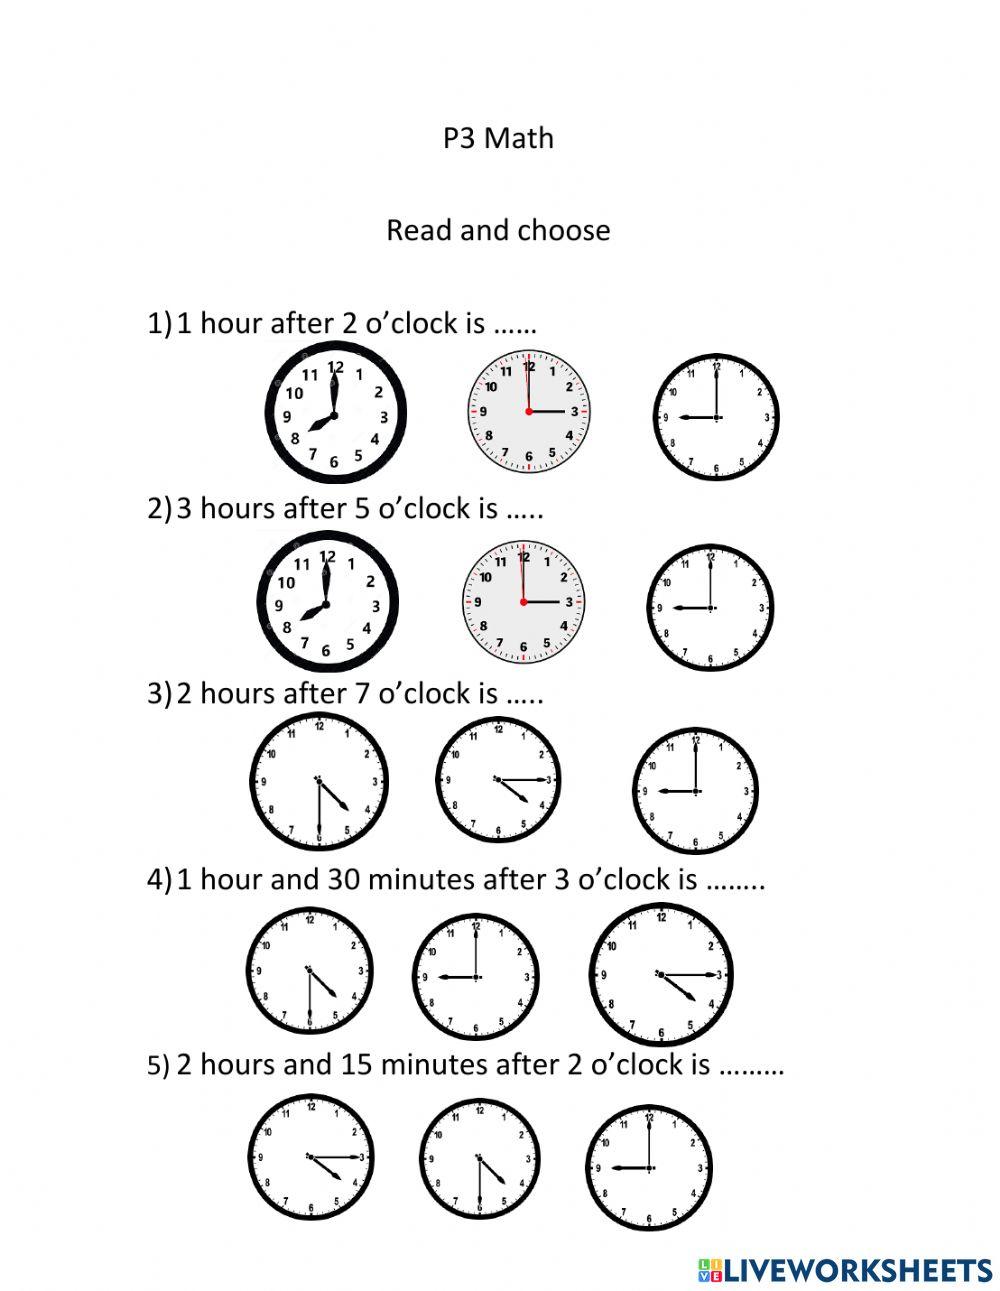 Read and tell the time